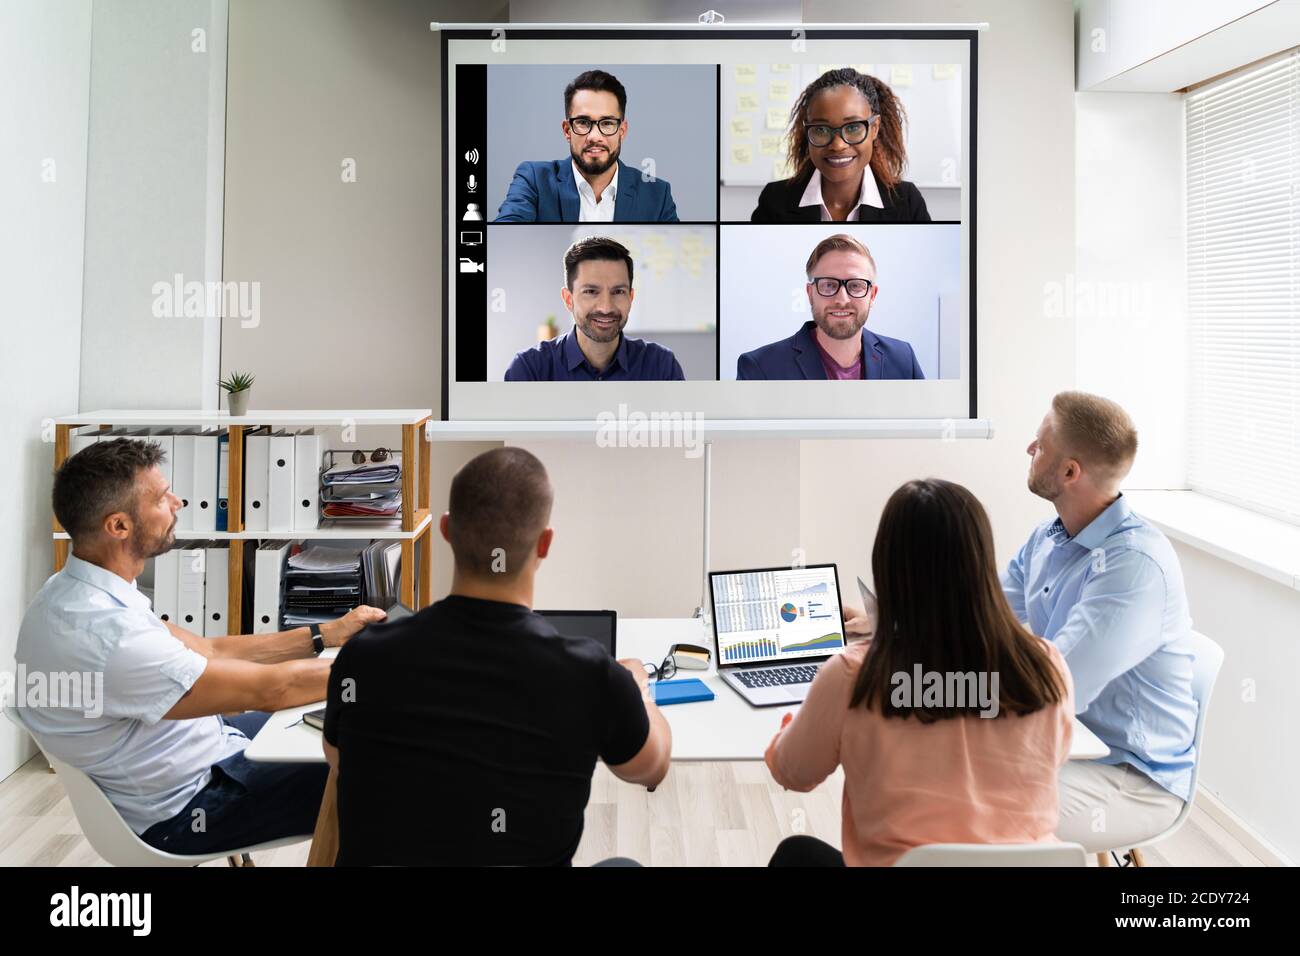 Online Video Conference Training Business Meeting In Office Stock Photo